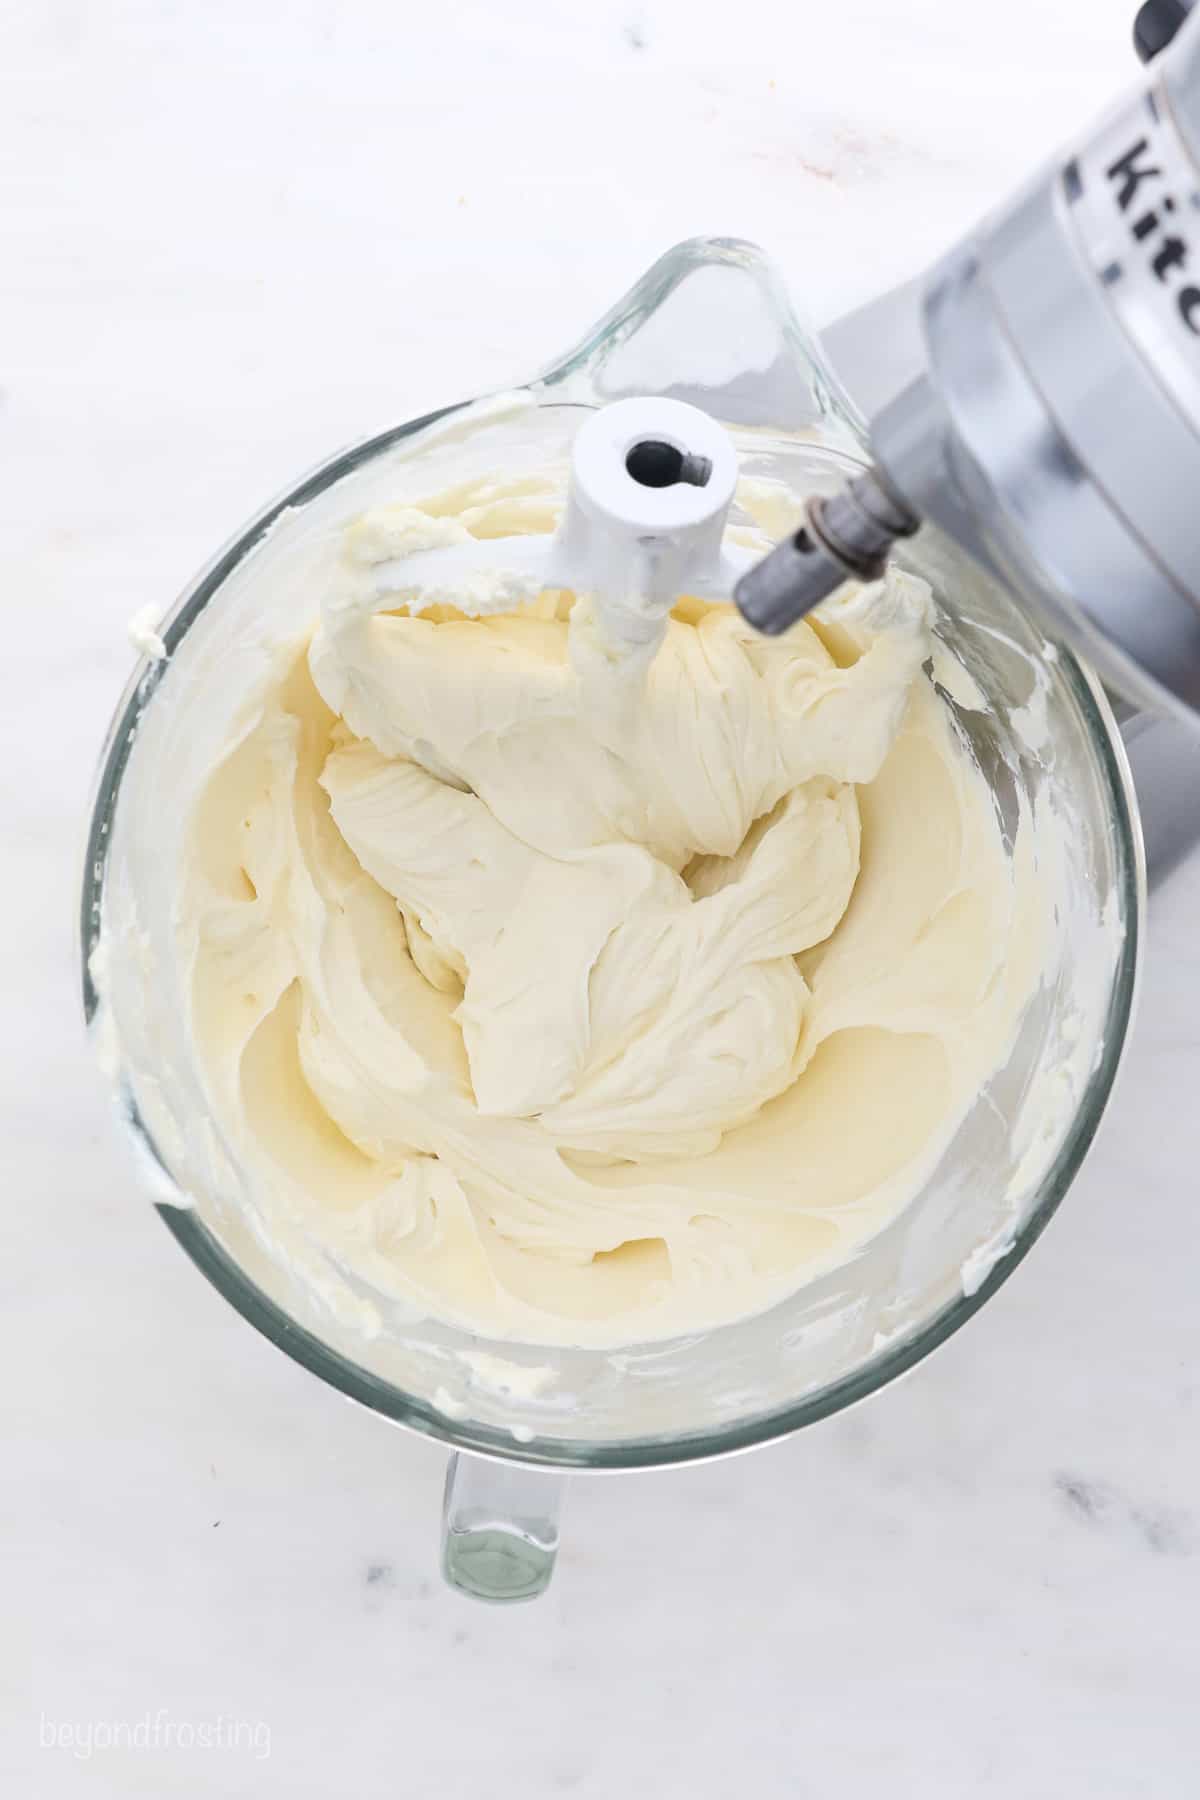 Overhead view of cheesecake batter in the glass bowl of a stand mixer.